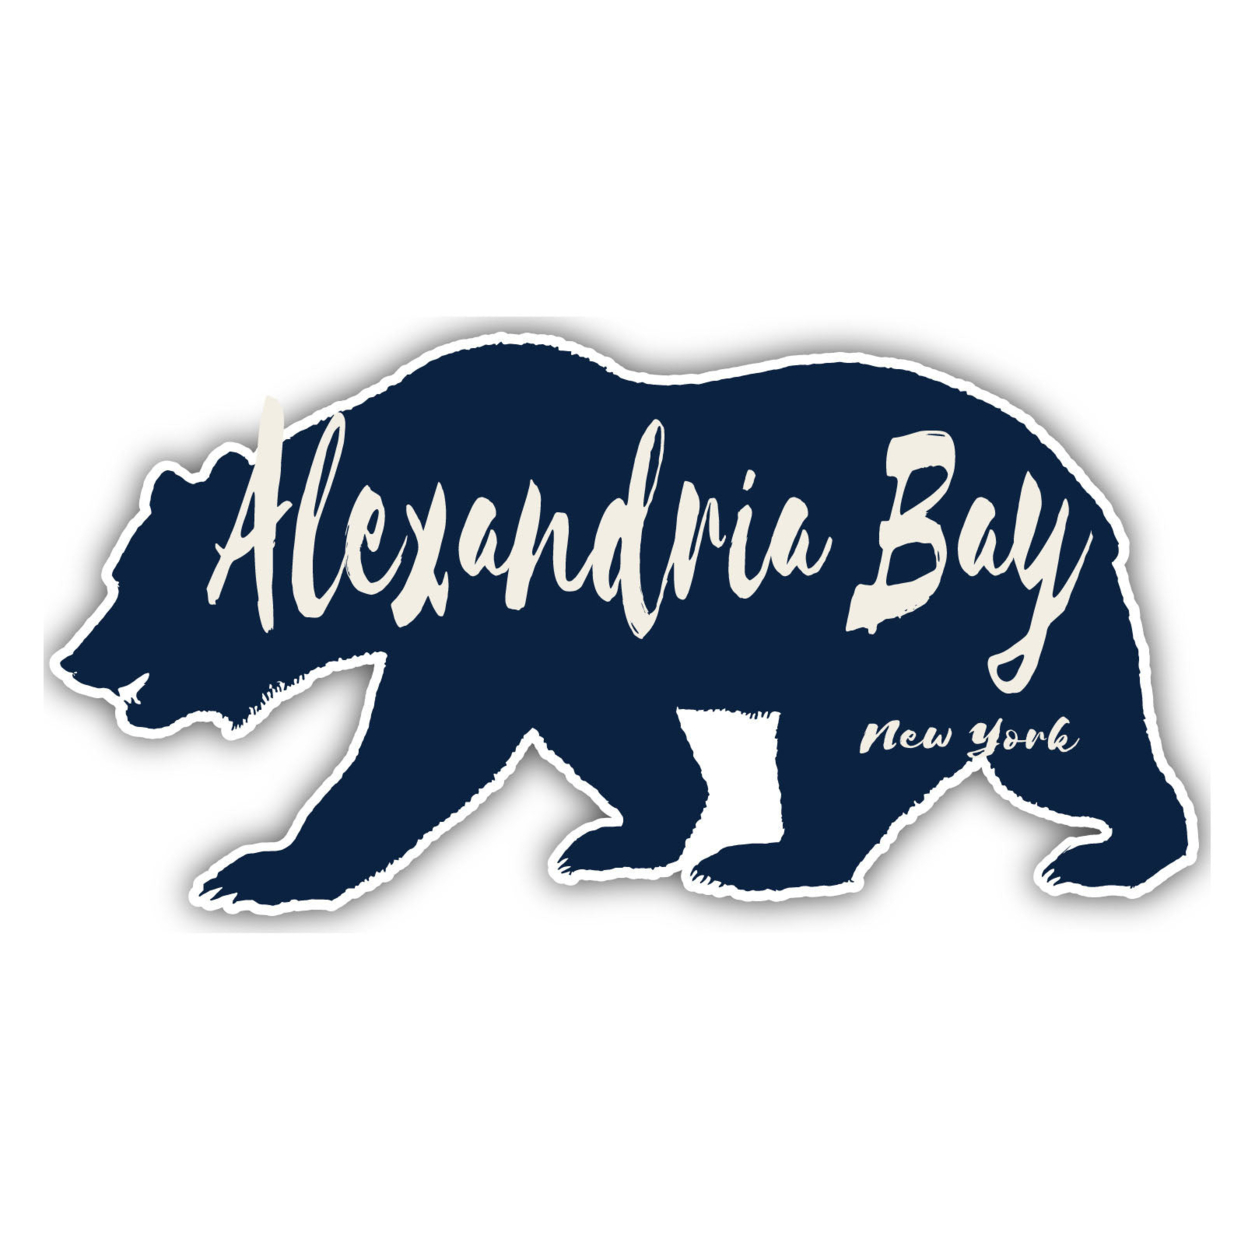 Alexandria Bay New York Souvenir Decorative Stickers (Choose Theme And Size) - 4-Pack, 2-Inch, Tent